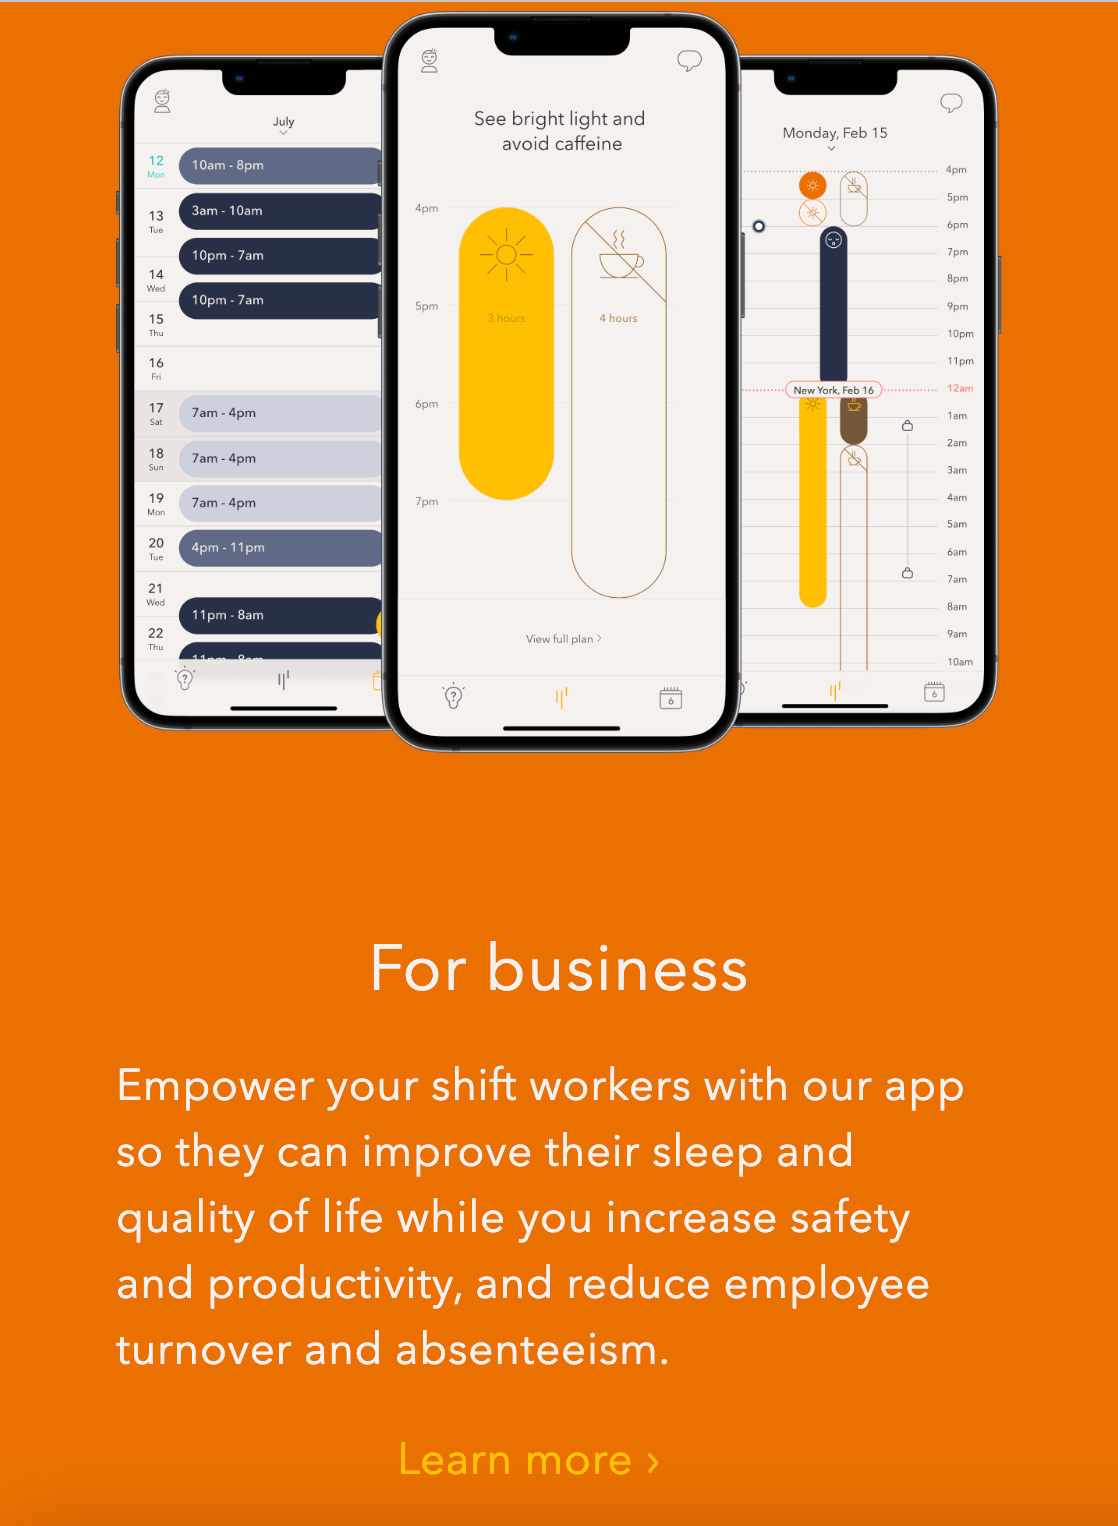 Timeshifter ad copy. It features three images of the app on an orange background with the text "For business. Empower your shift workers with our app so they can improve their sleep and quality of life while you increase safety and productivity, and reduce employee turnover and absenteeism."